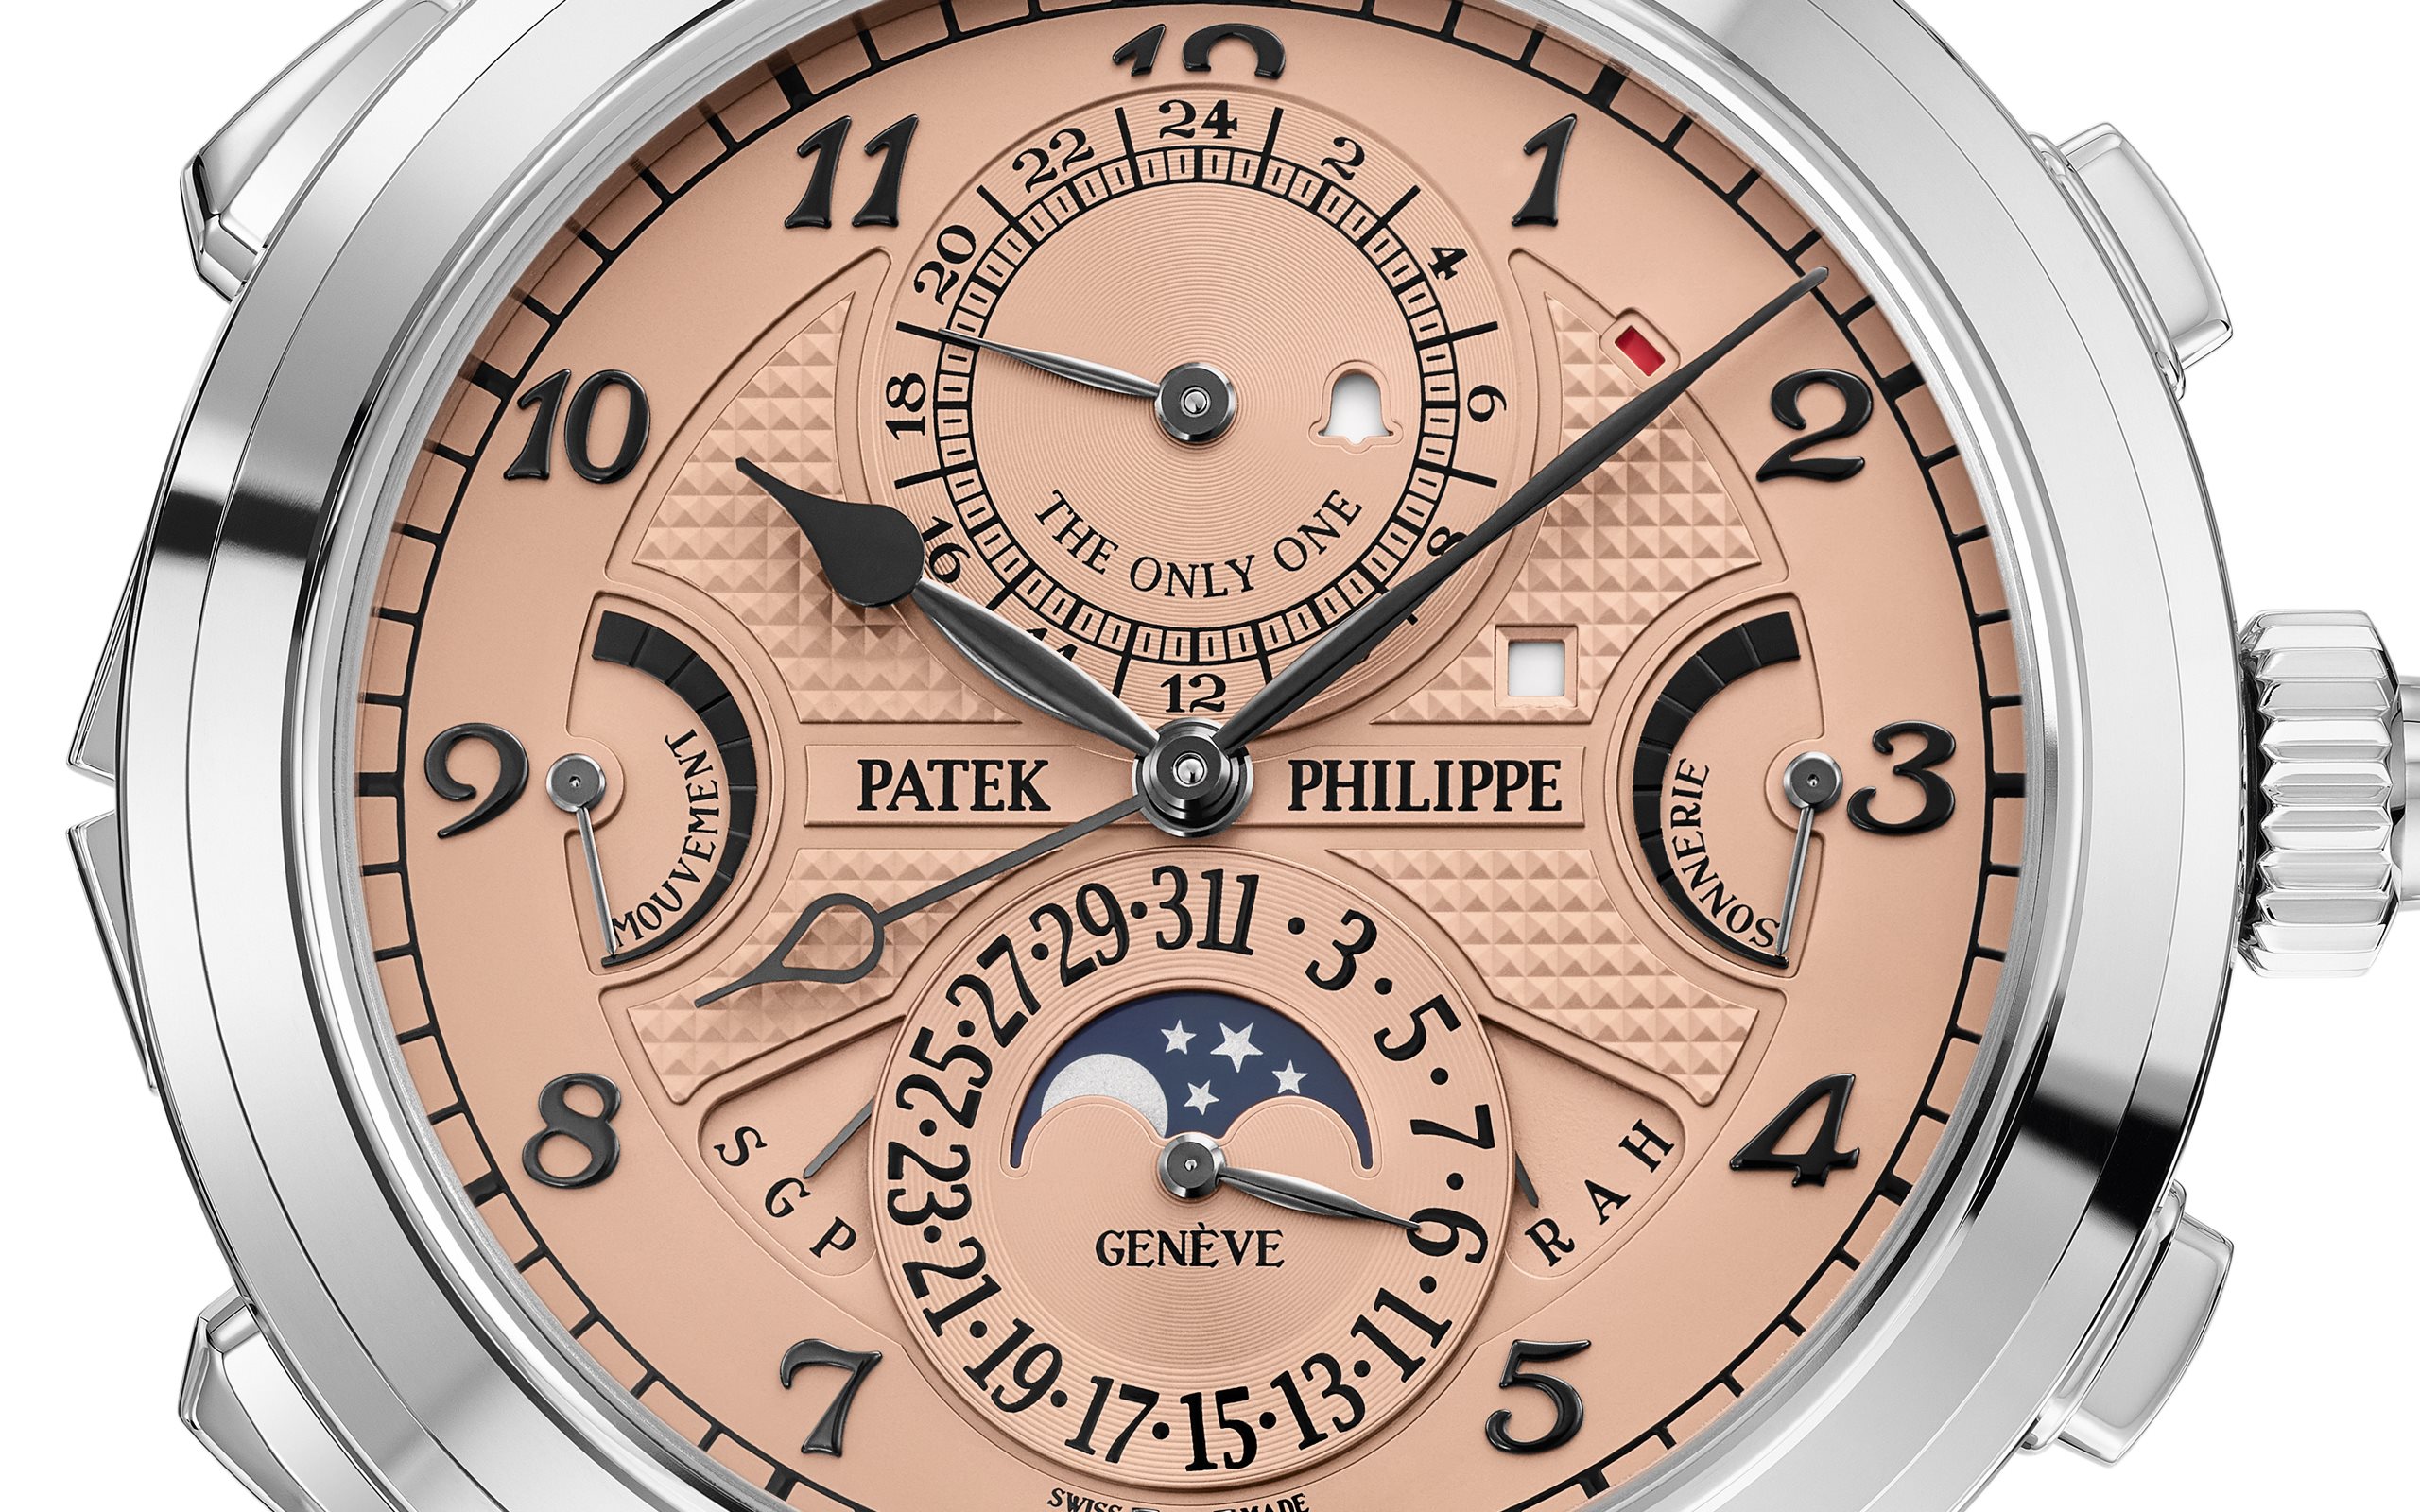 Patek Philippe Complications Chronograph White Gold 5170G-001